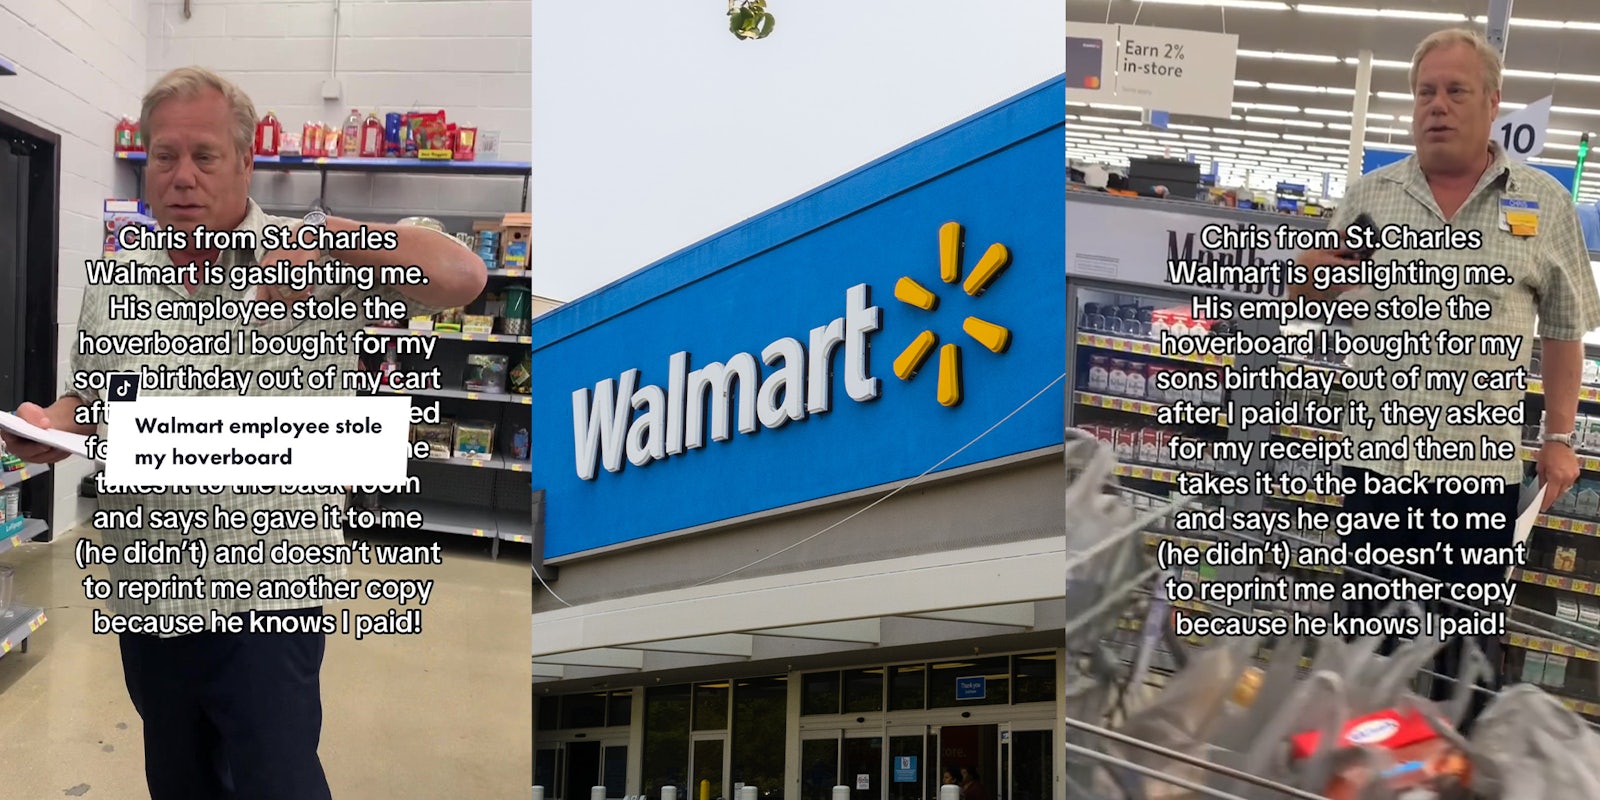 customer says Wal-Mart worker 'stole' her son's hoverboard after she paid for it